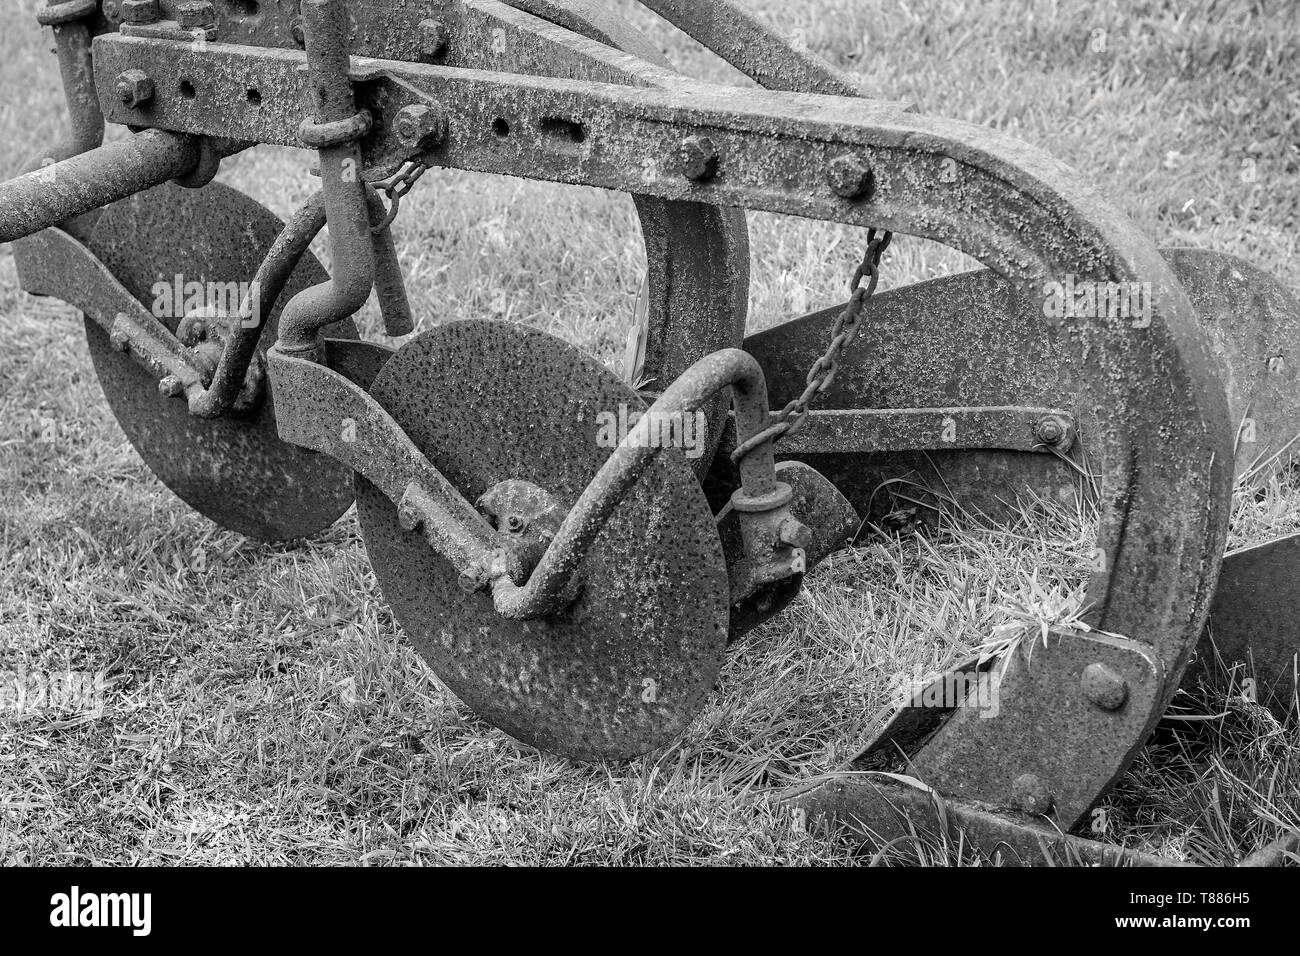 An Old disused plough being used as a garden ornament Stock Photo